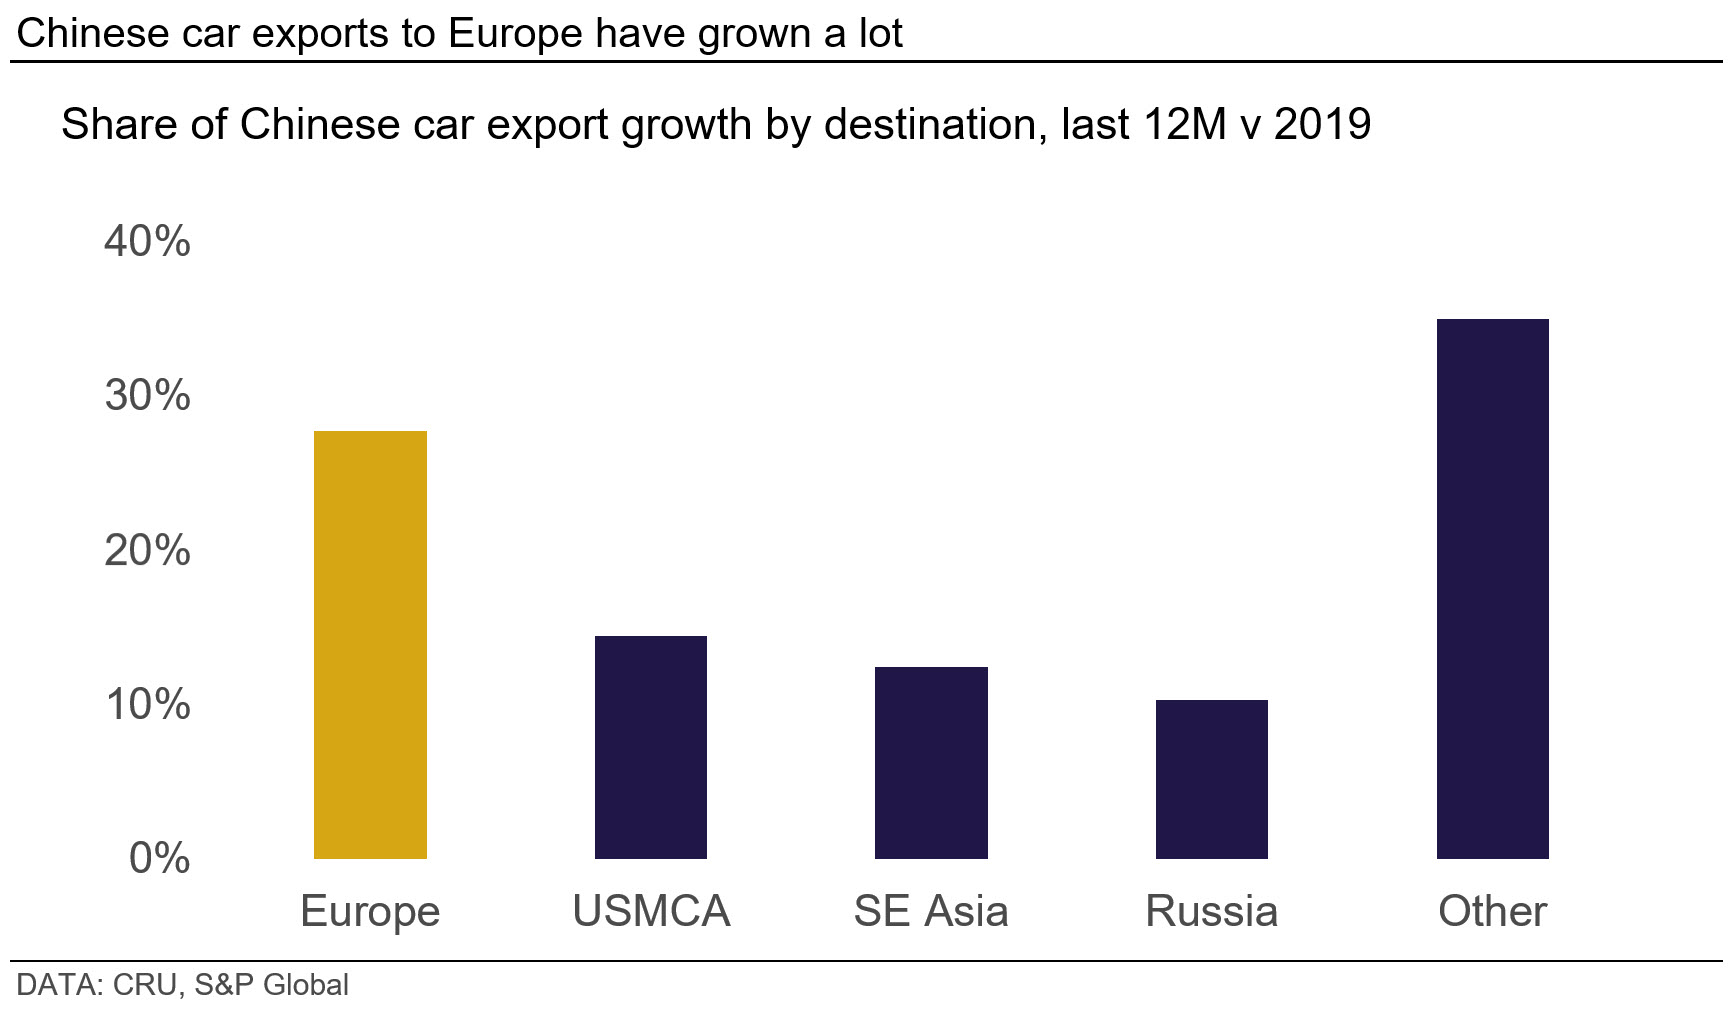 Graph showing that Chinese car exports to Europe have grown a lot